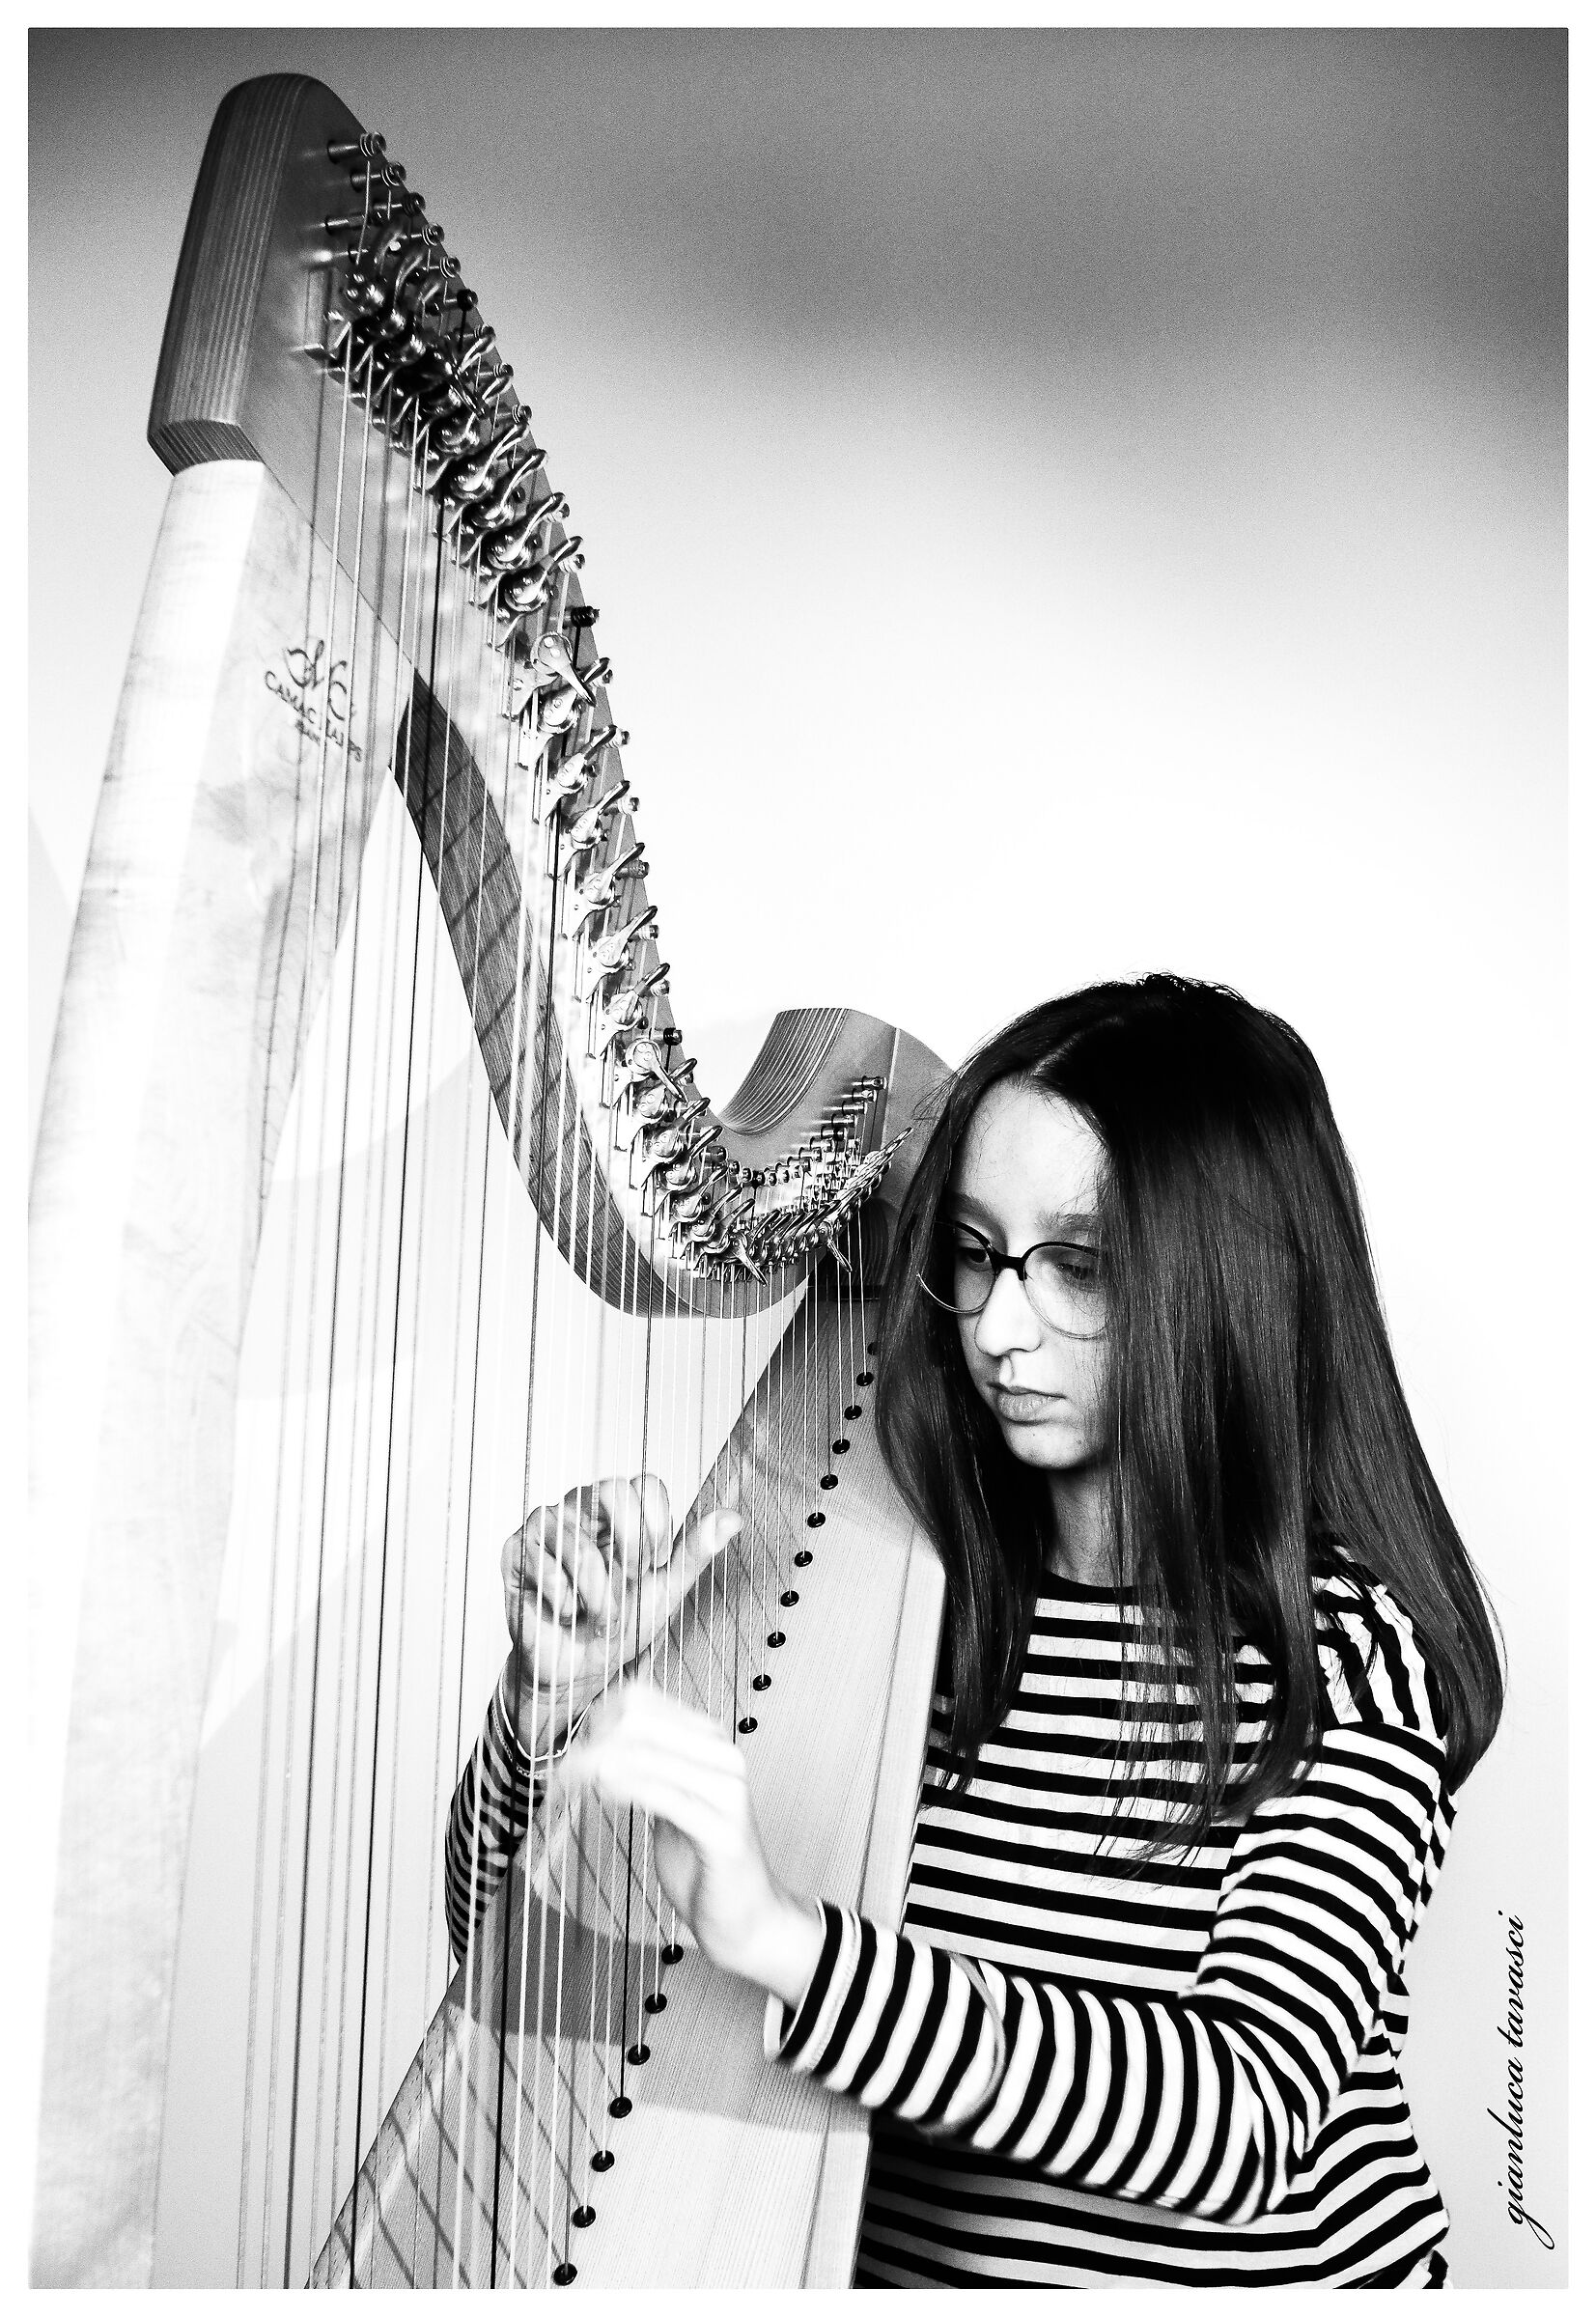 Playing the harp...